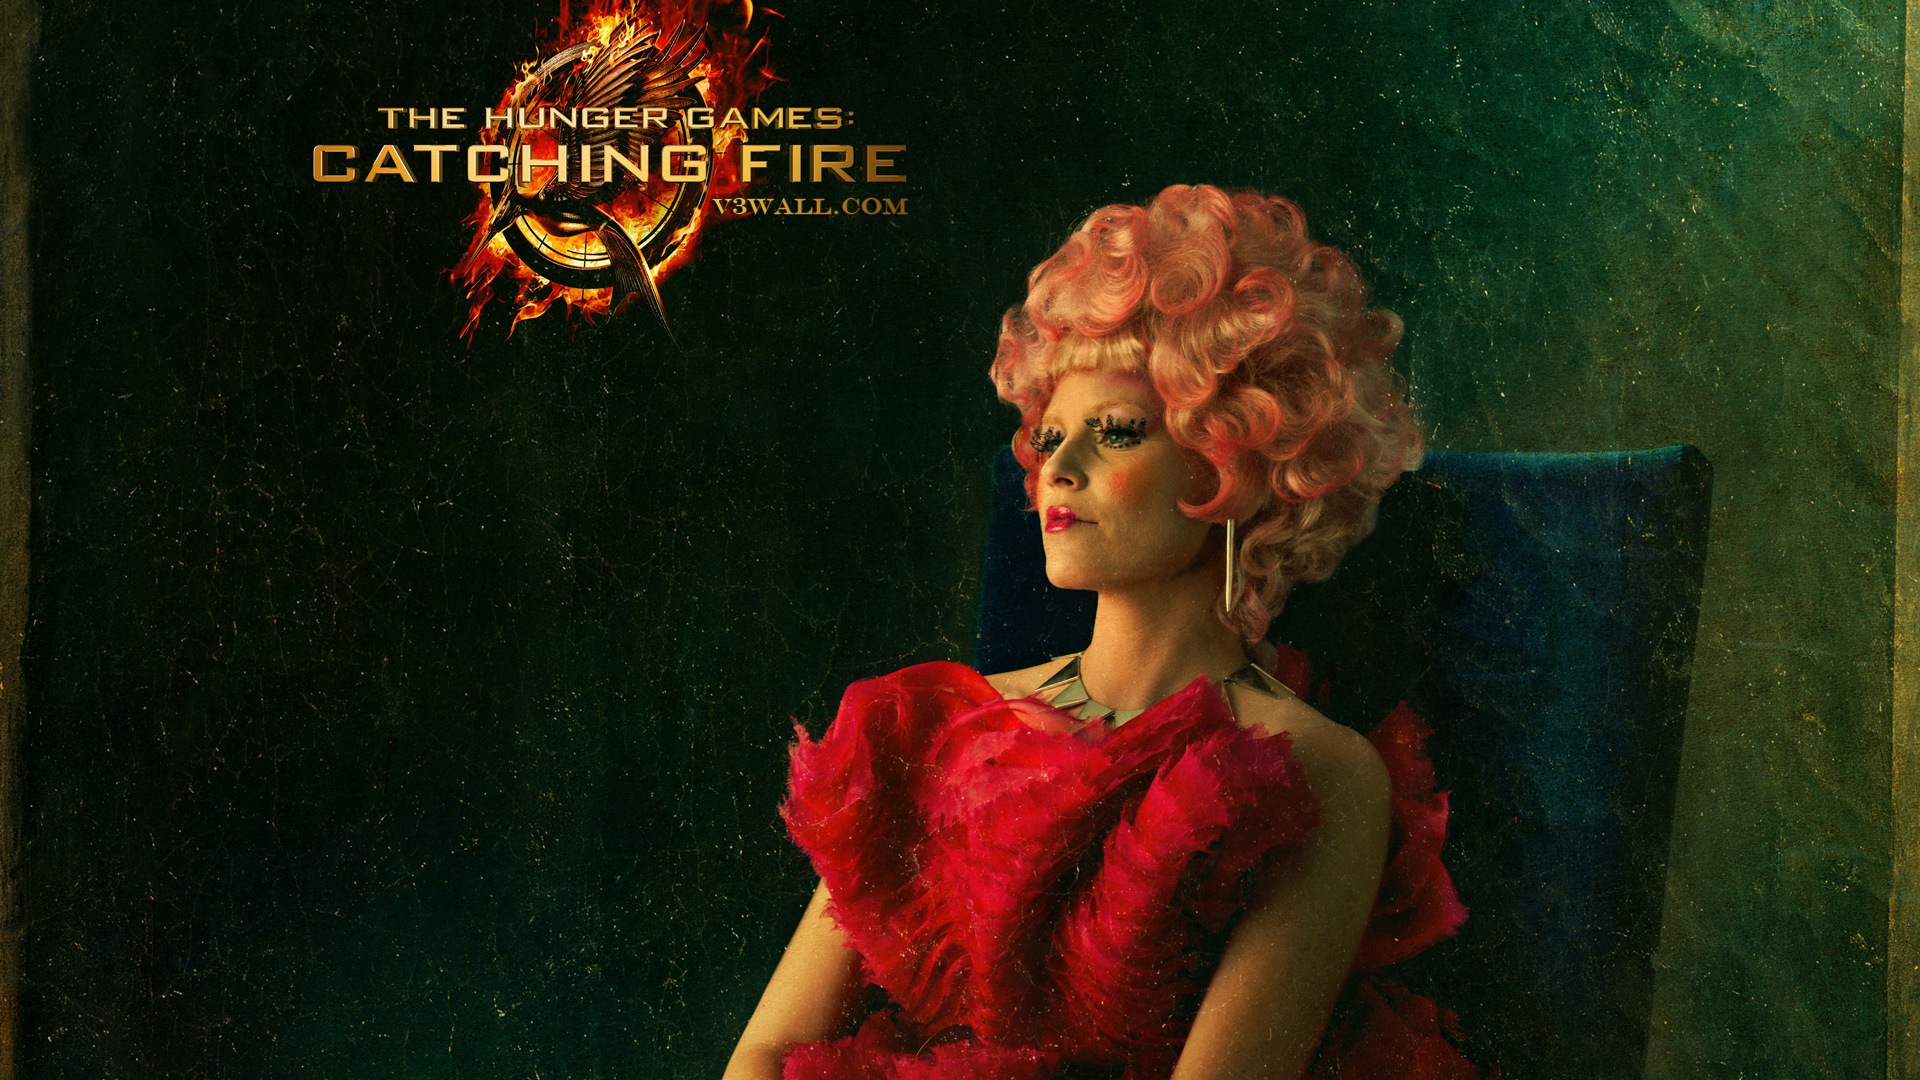 The Hunger Games: Catching Fire HD tapety #19 - 1920x1080